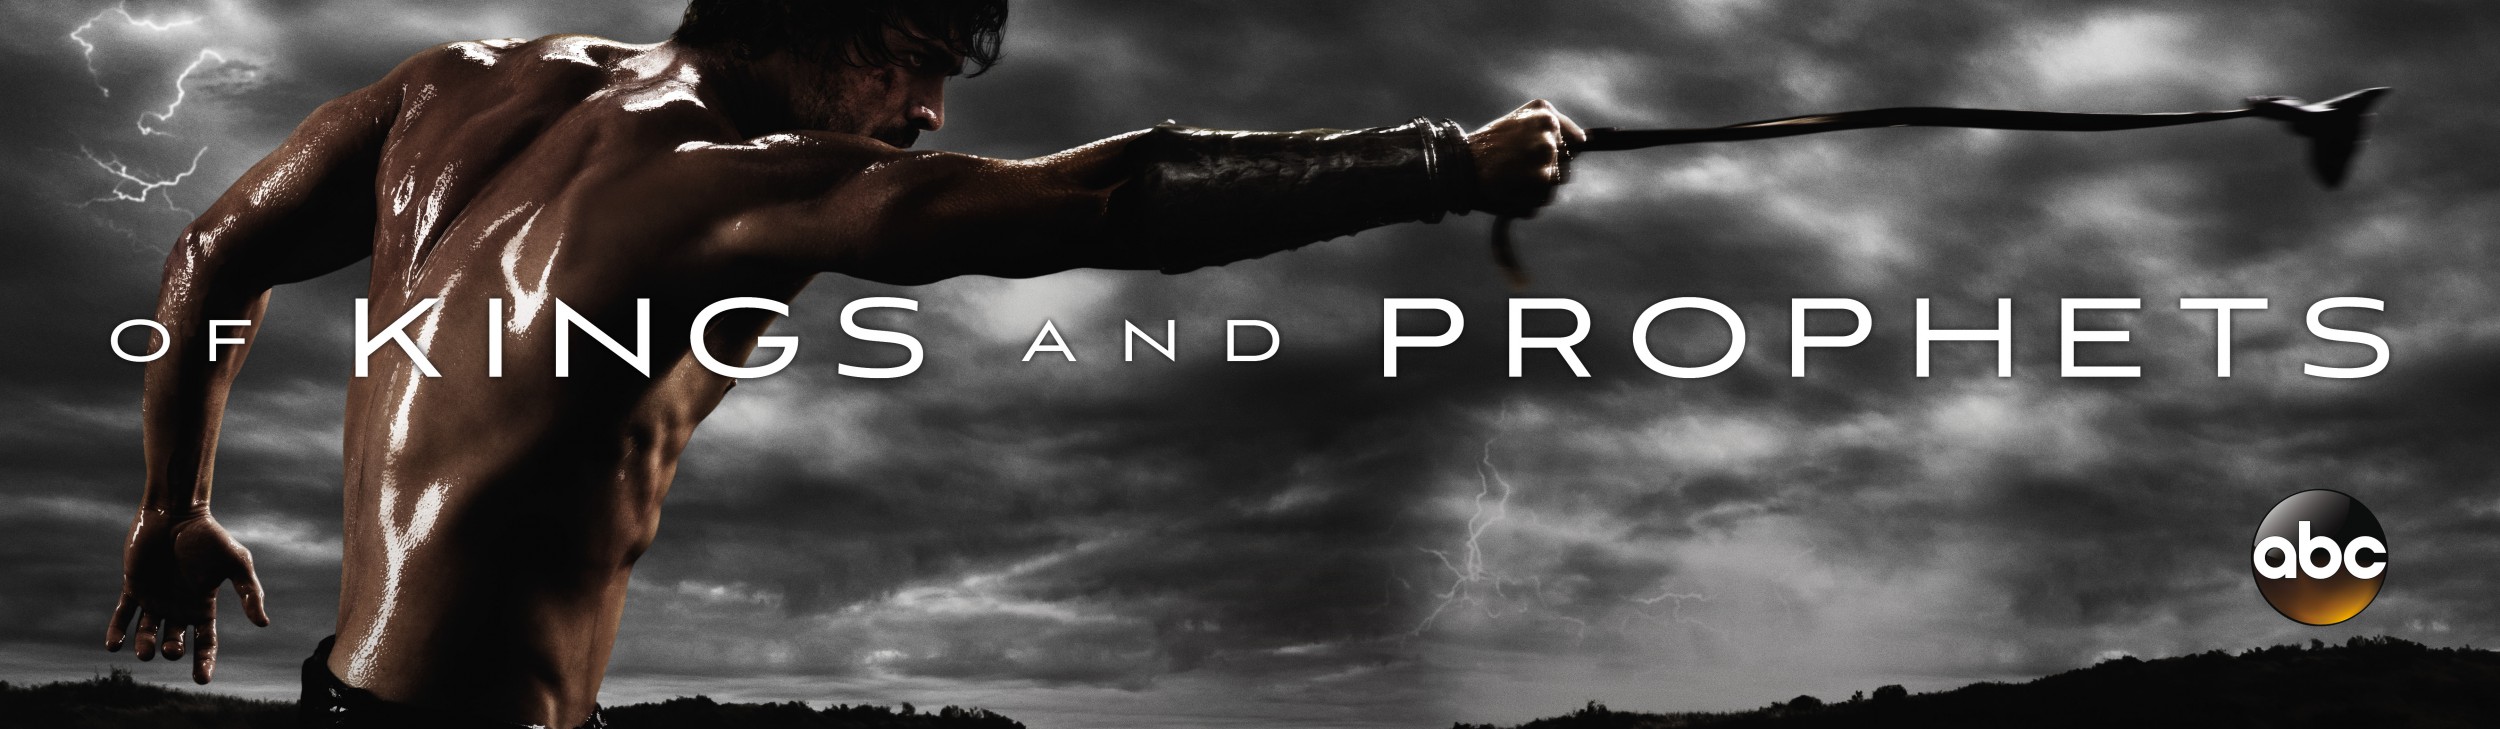 Mega Sized TV Poster Image for Of Kings and Prophets (#2 of 2)